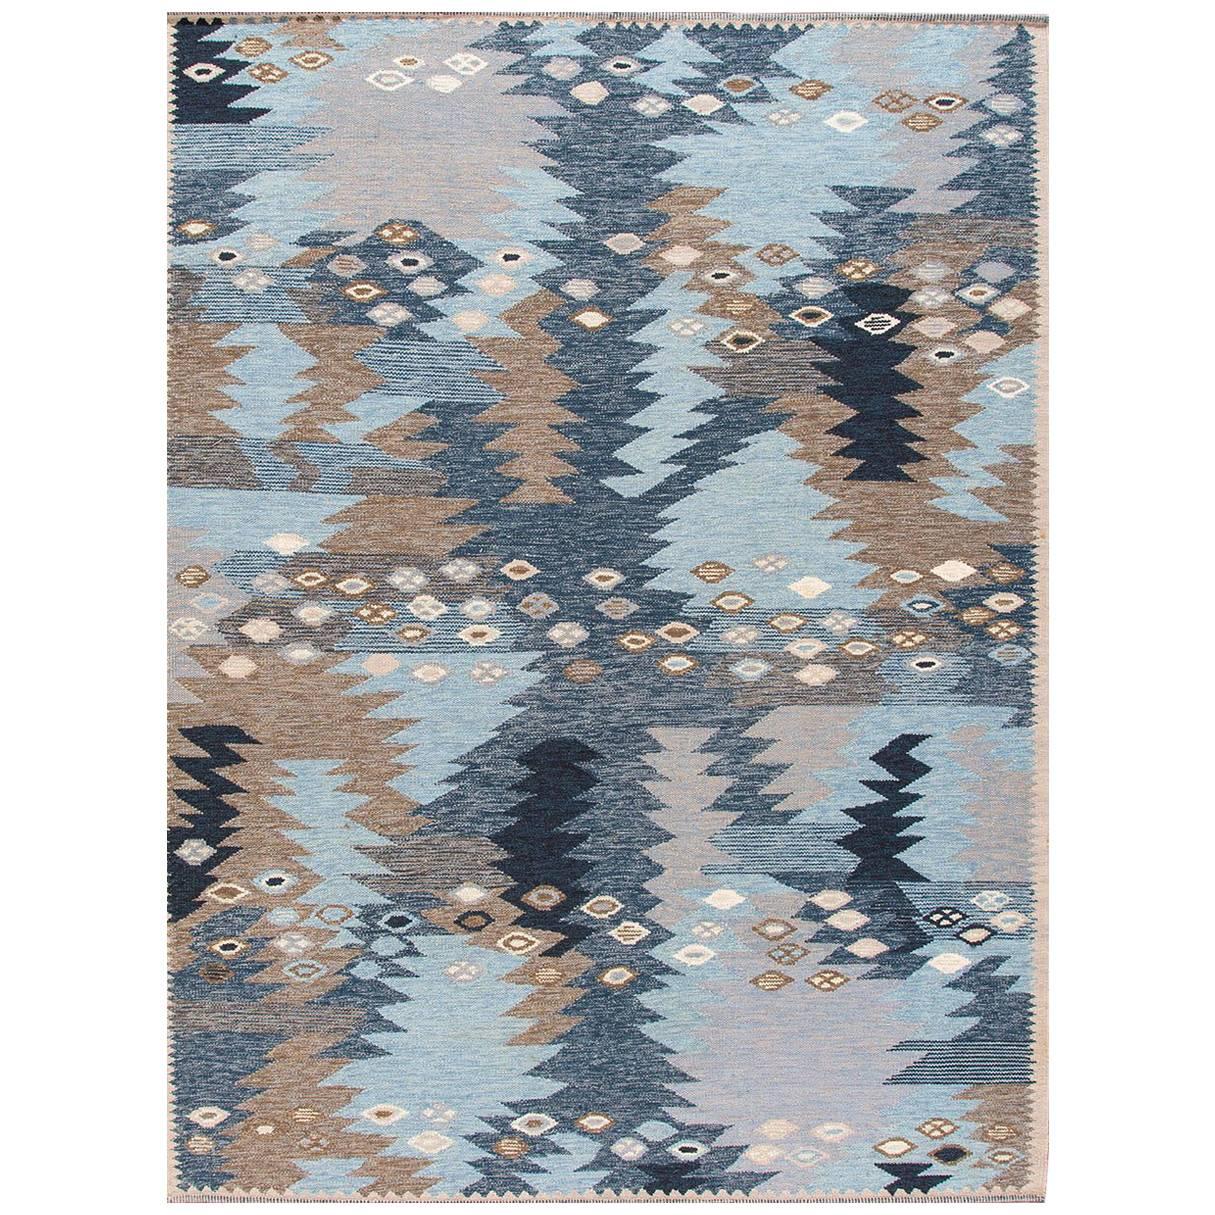 Contemporary Abstract Geometric Blue Swedish style  Rug, 8.08x11.10 For Sale